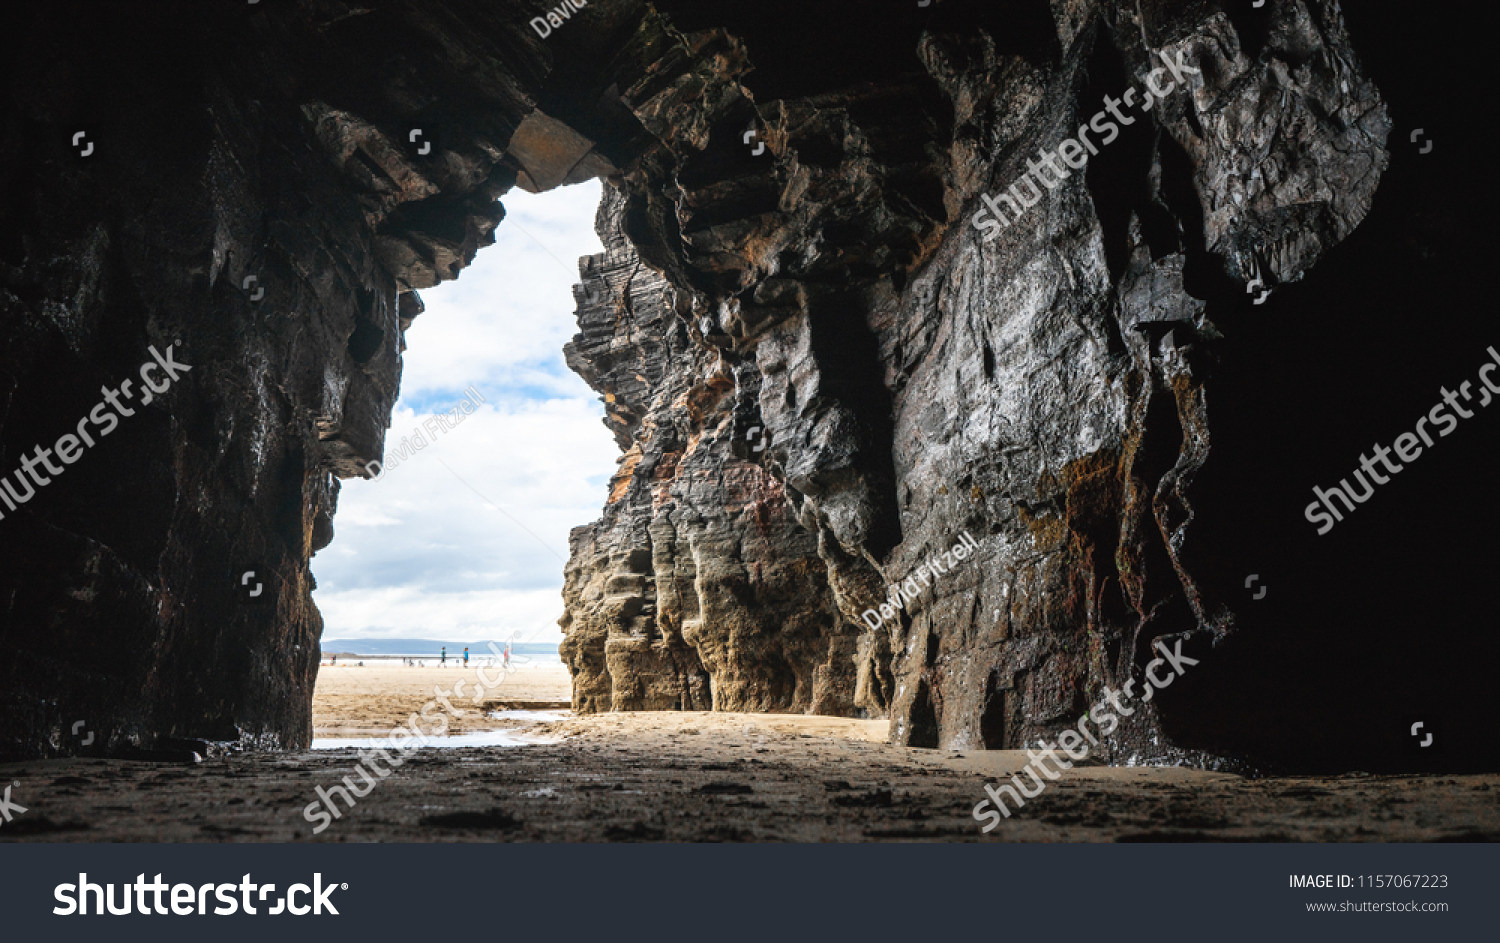 The Ballybunion coast line when the tide is out. Amazing caves and rock formations can be seen when the tide is low in Bally B. #1157067223